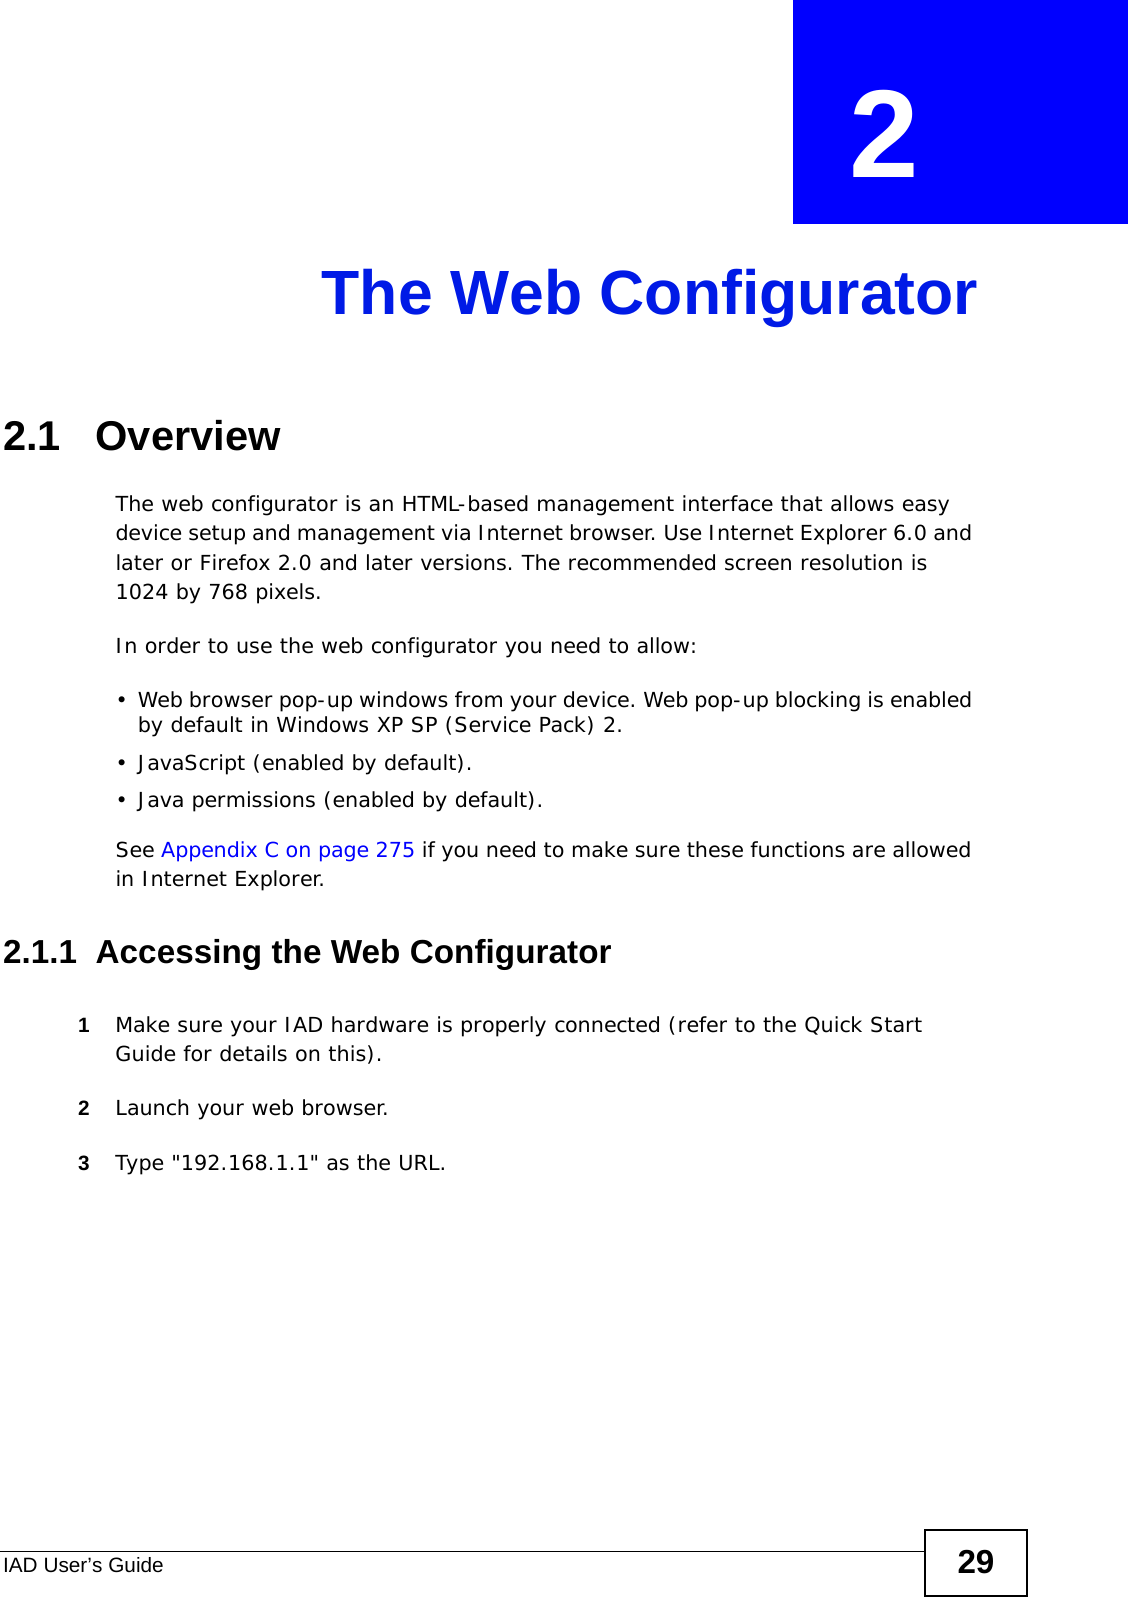 IAD User’s Guide 29CHAPTER  2 The Web Configurator2.1   OverviewThe web configurator is an HTML-based management interface that allows easy device setup and management via Internet browser. Use Internet Explorer 6.0 and later or Firefox 2.0 and later versions. The recommended screen resolution is 1024 by 768 pixels.In order to use the web configurator you need to allow:• Web browser pop-up windows from your device. Web pop-up blocking is enabled by default in Windows XP SP (Service Pack) 2.• JavaScript (enabled by default).• Java permissions (enabled by default).See Appendix C on page 275 if you need to make sure these functions are allowed in Internet Explorer.2.1.1  Accessing the Web Configurator1Make sure your IAD hardware is properly connected (refer to the Quick Start Guide for details on this).2Launch your web browser.3Type &quot;192.168.1.1&quot; as the URL.